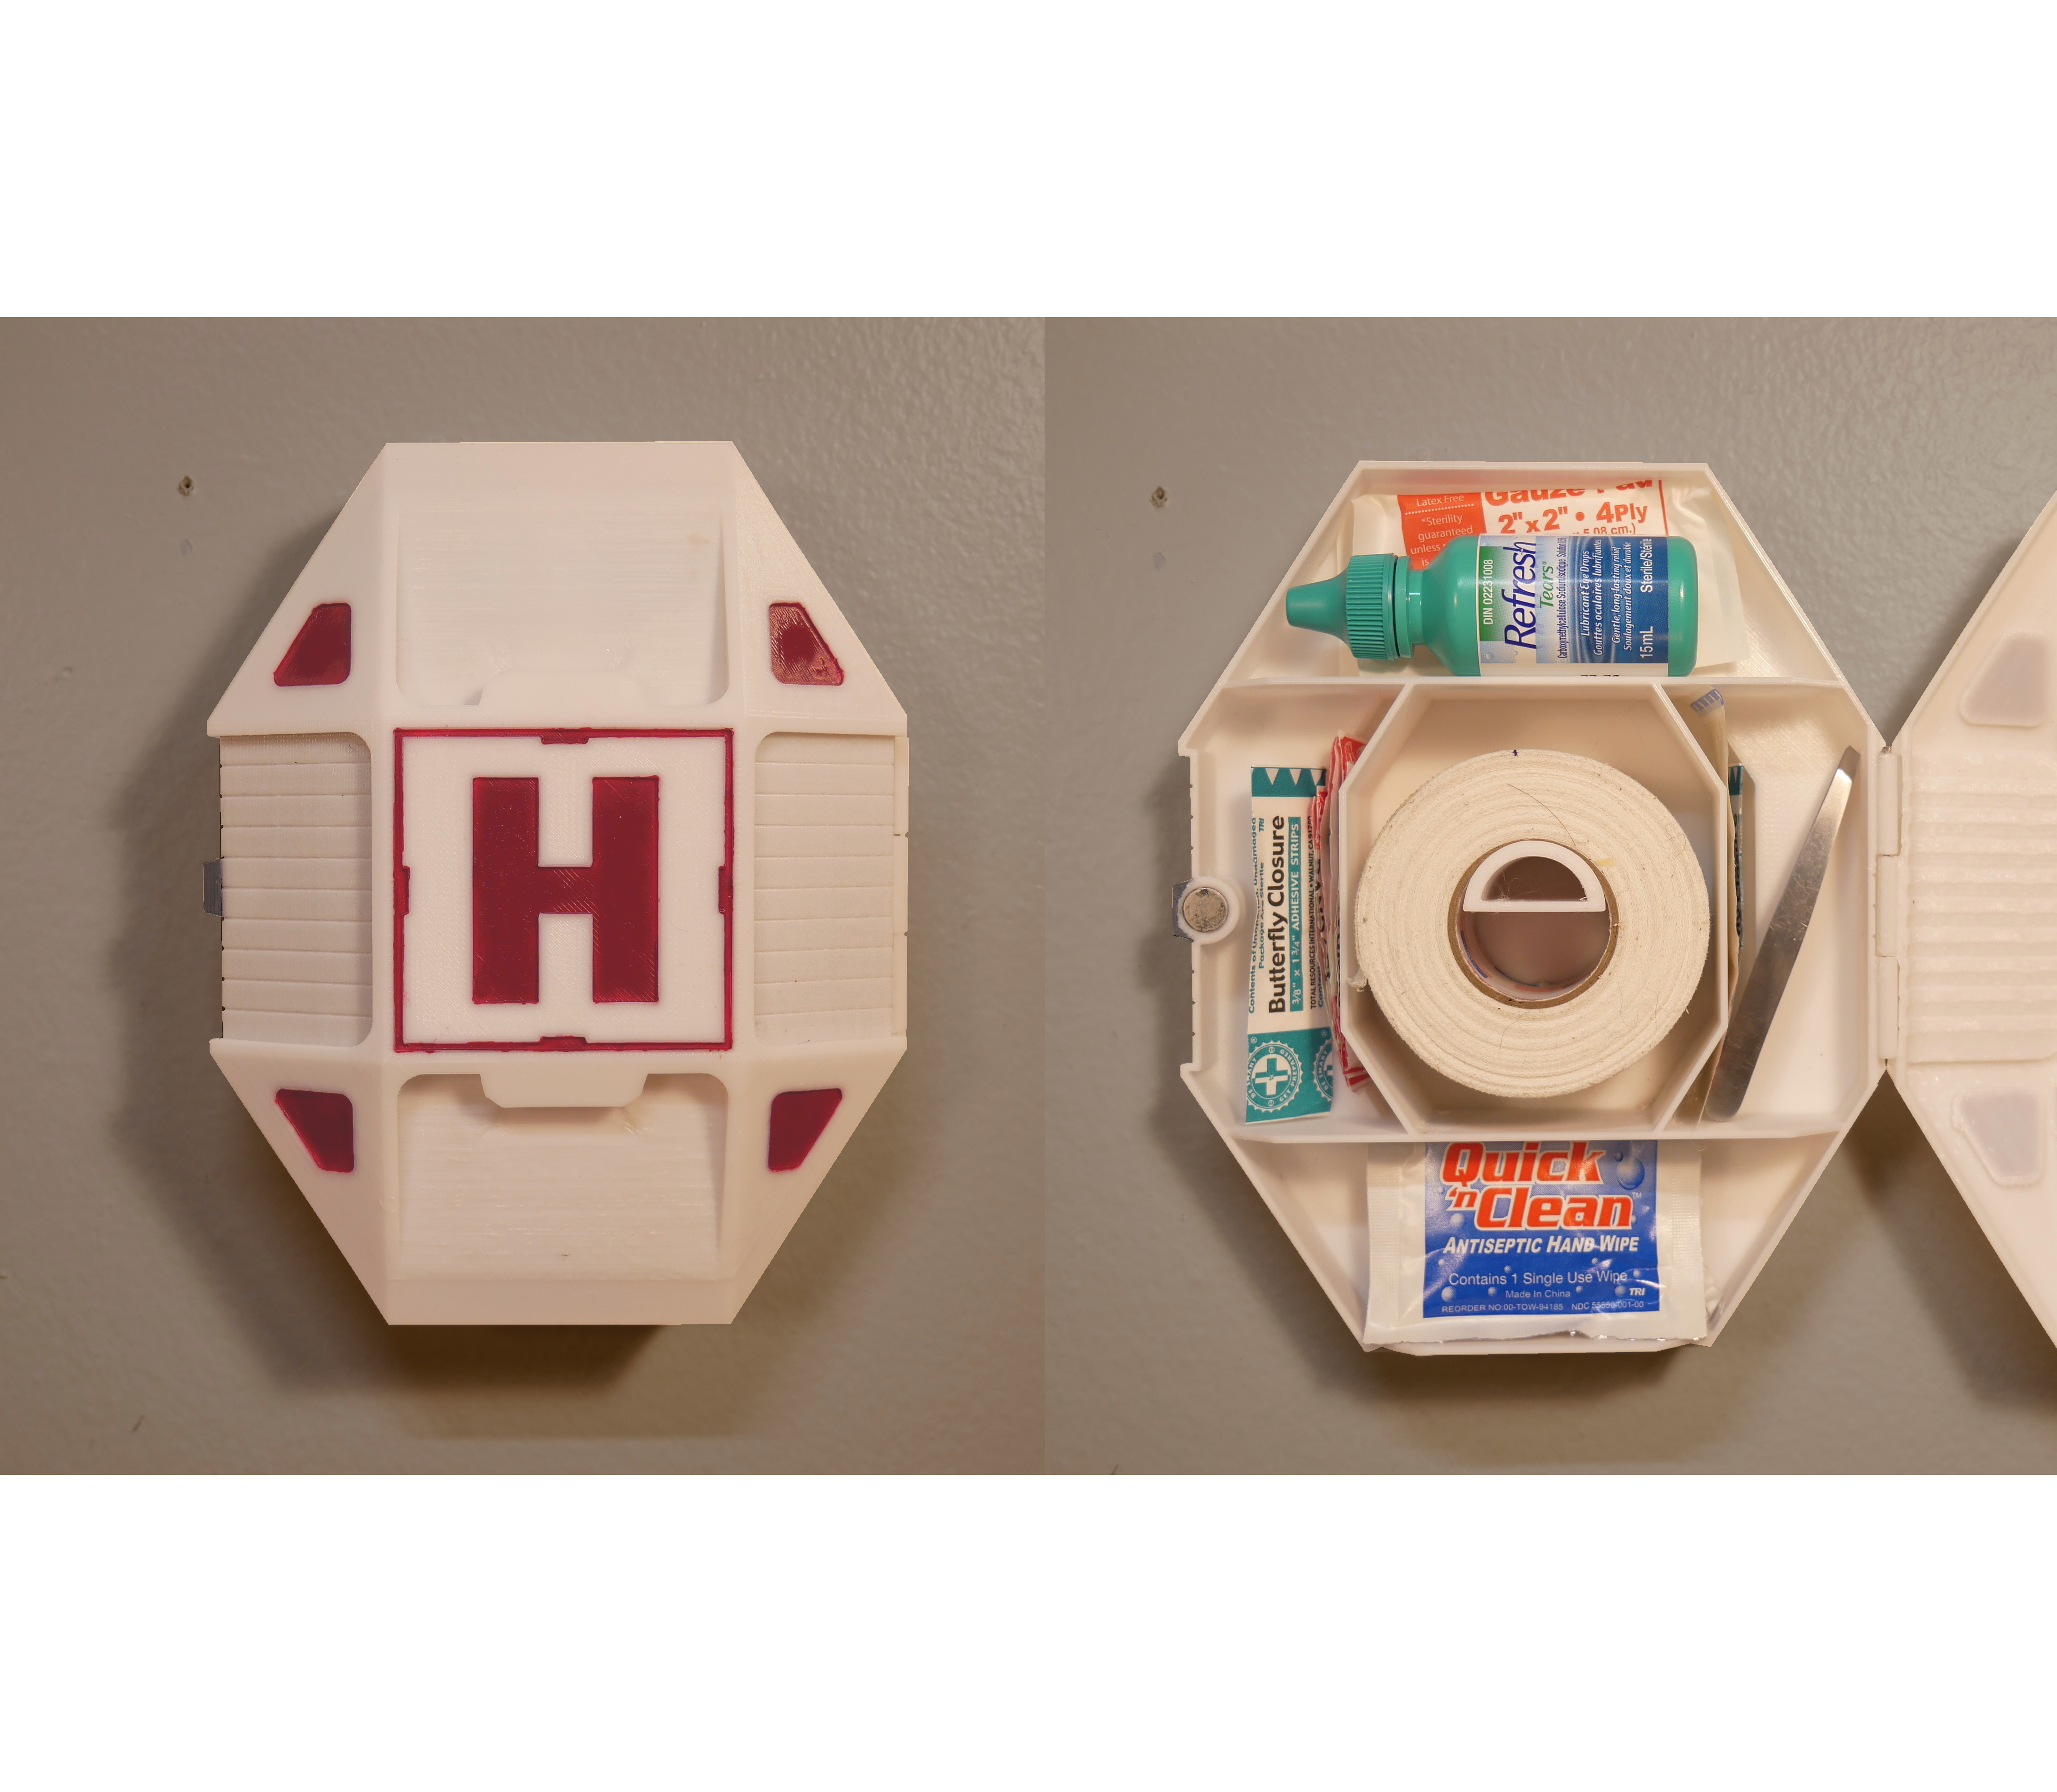 Halo Health Pack First Aid Kit